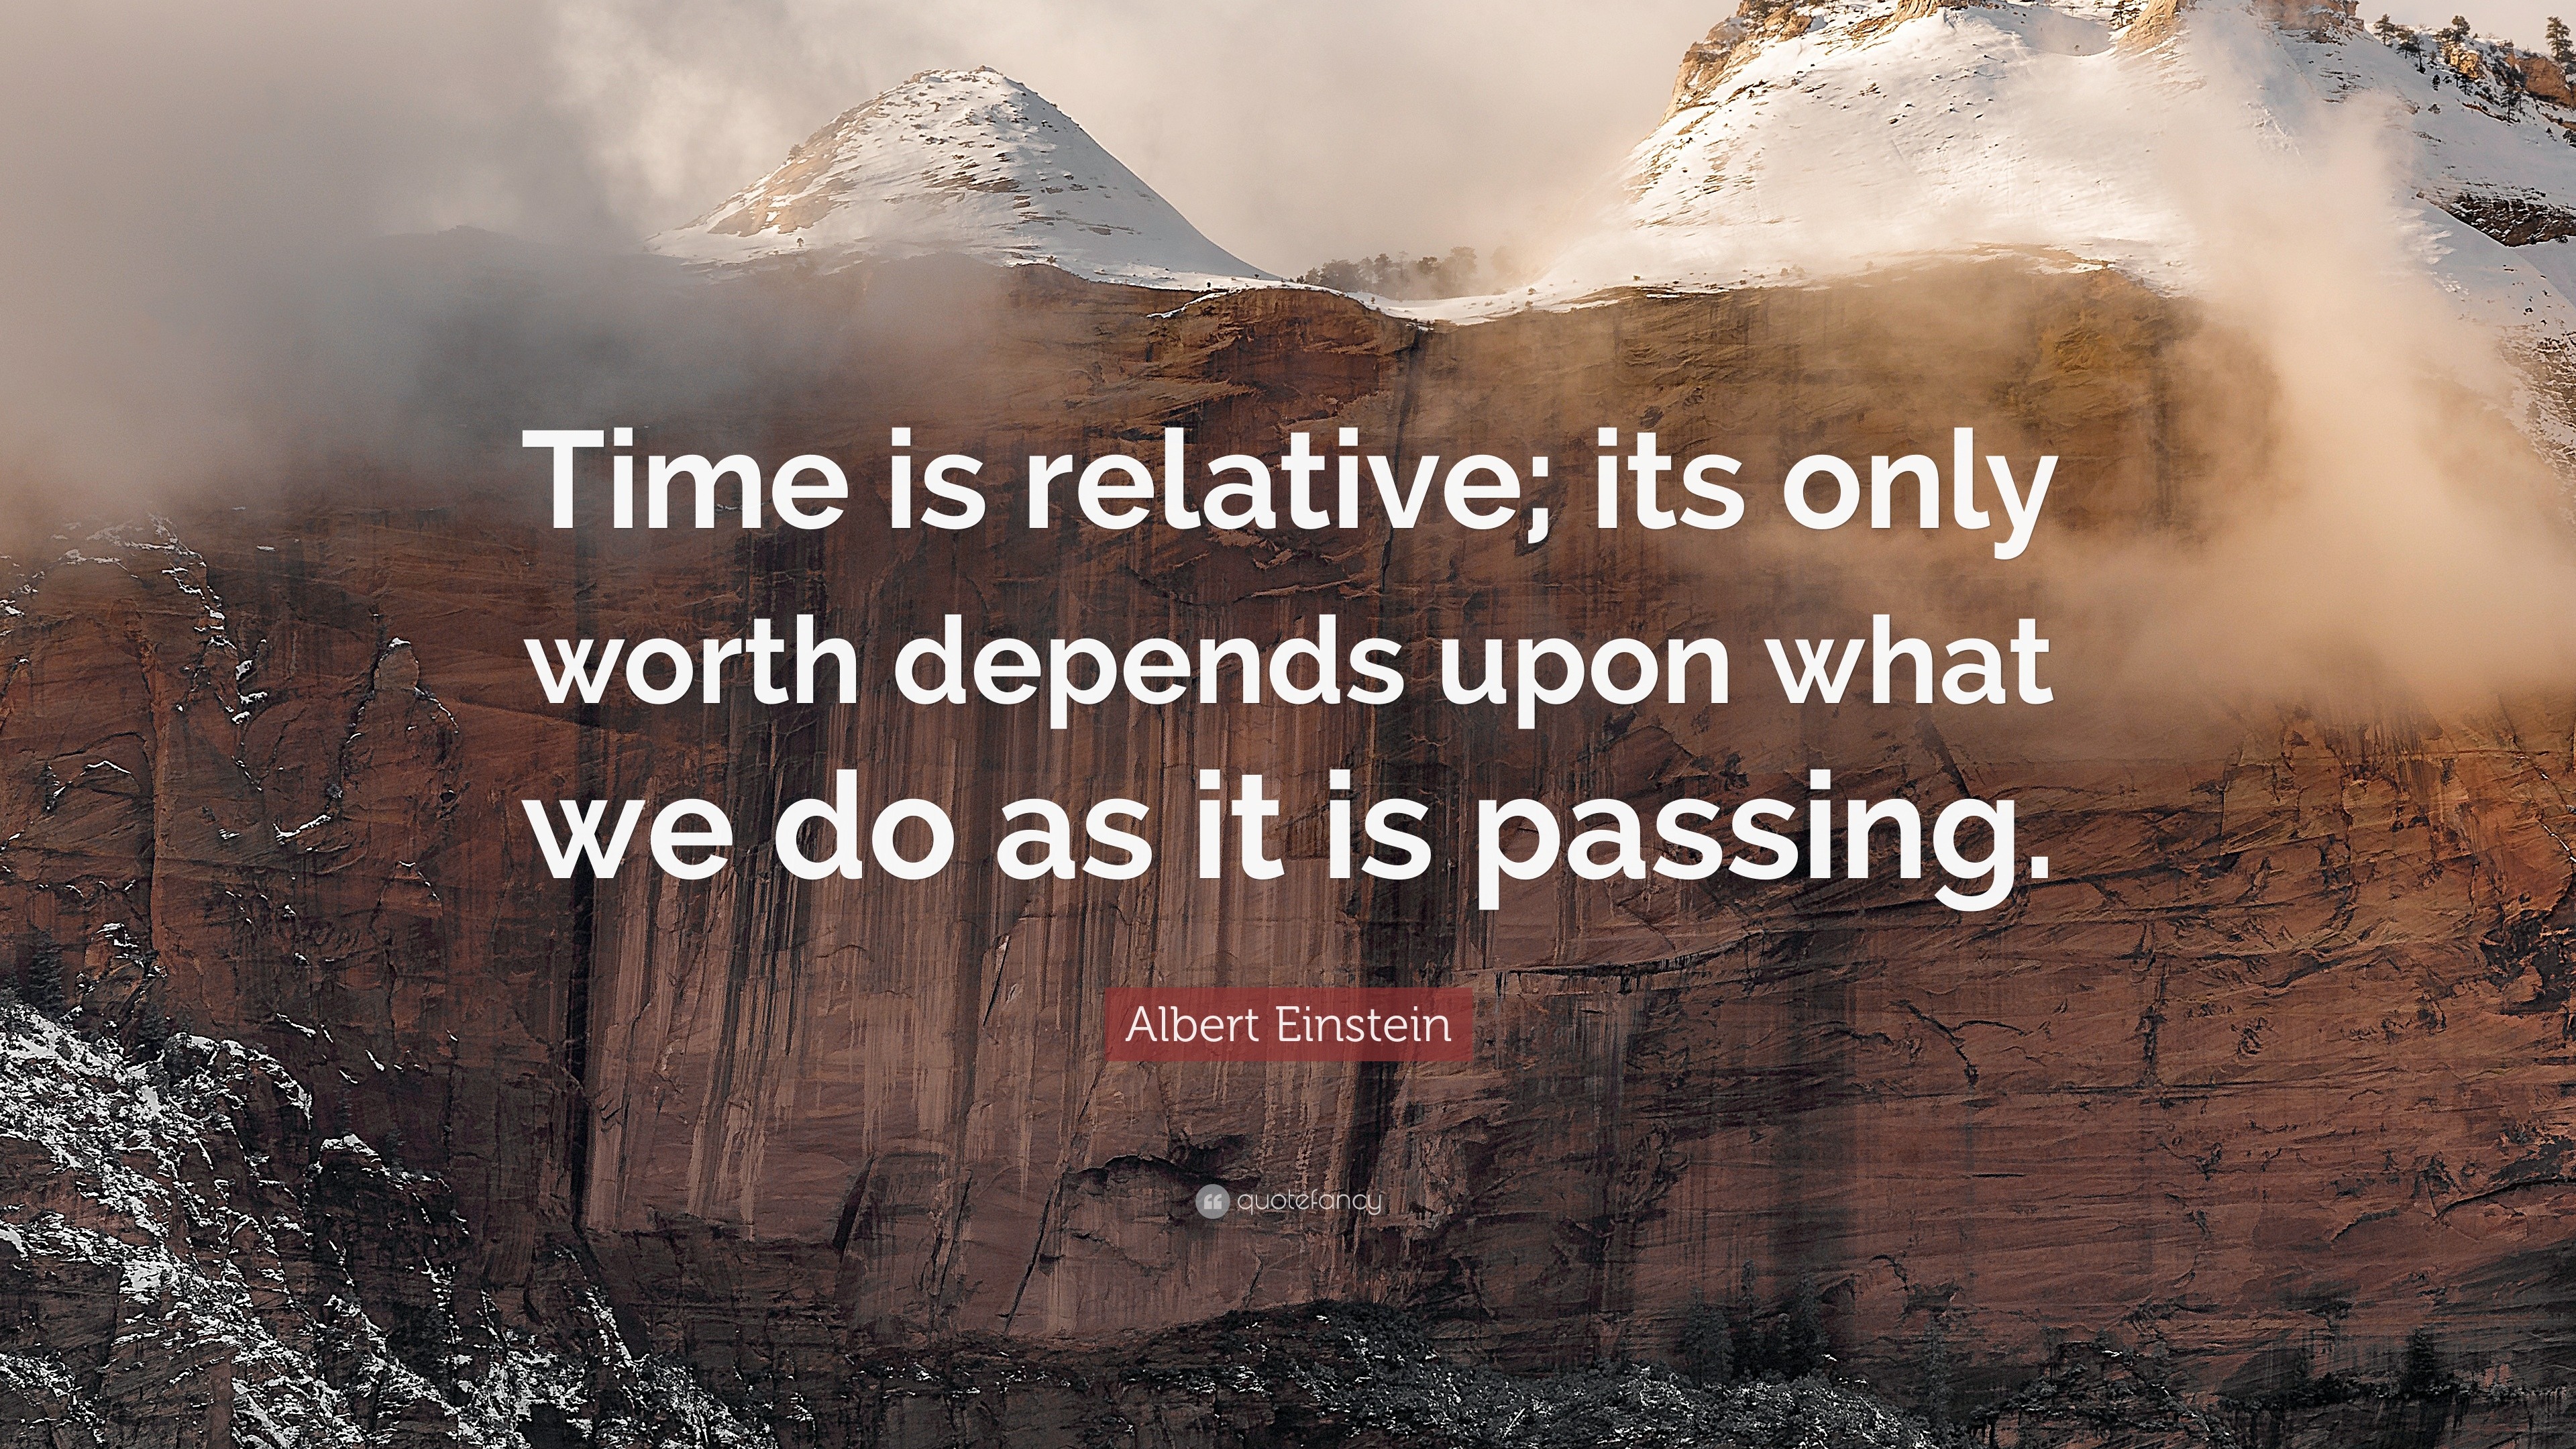 Albert Einstein Quote Time Is Relative Its Only Worth Depends Upon What We Do As It